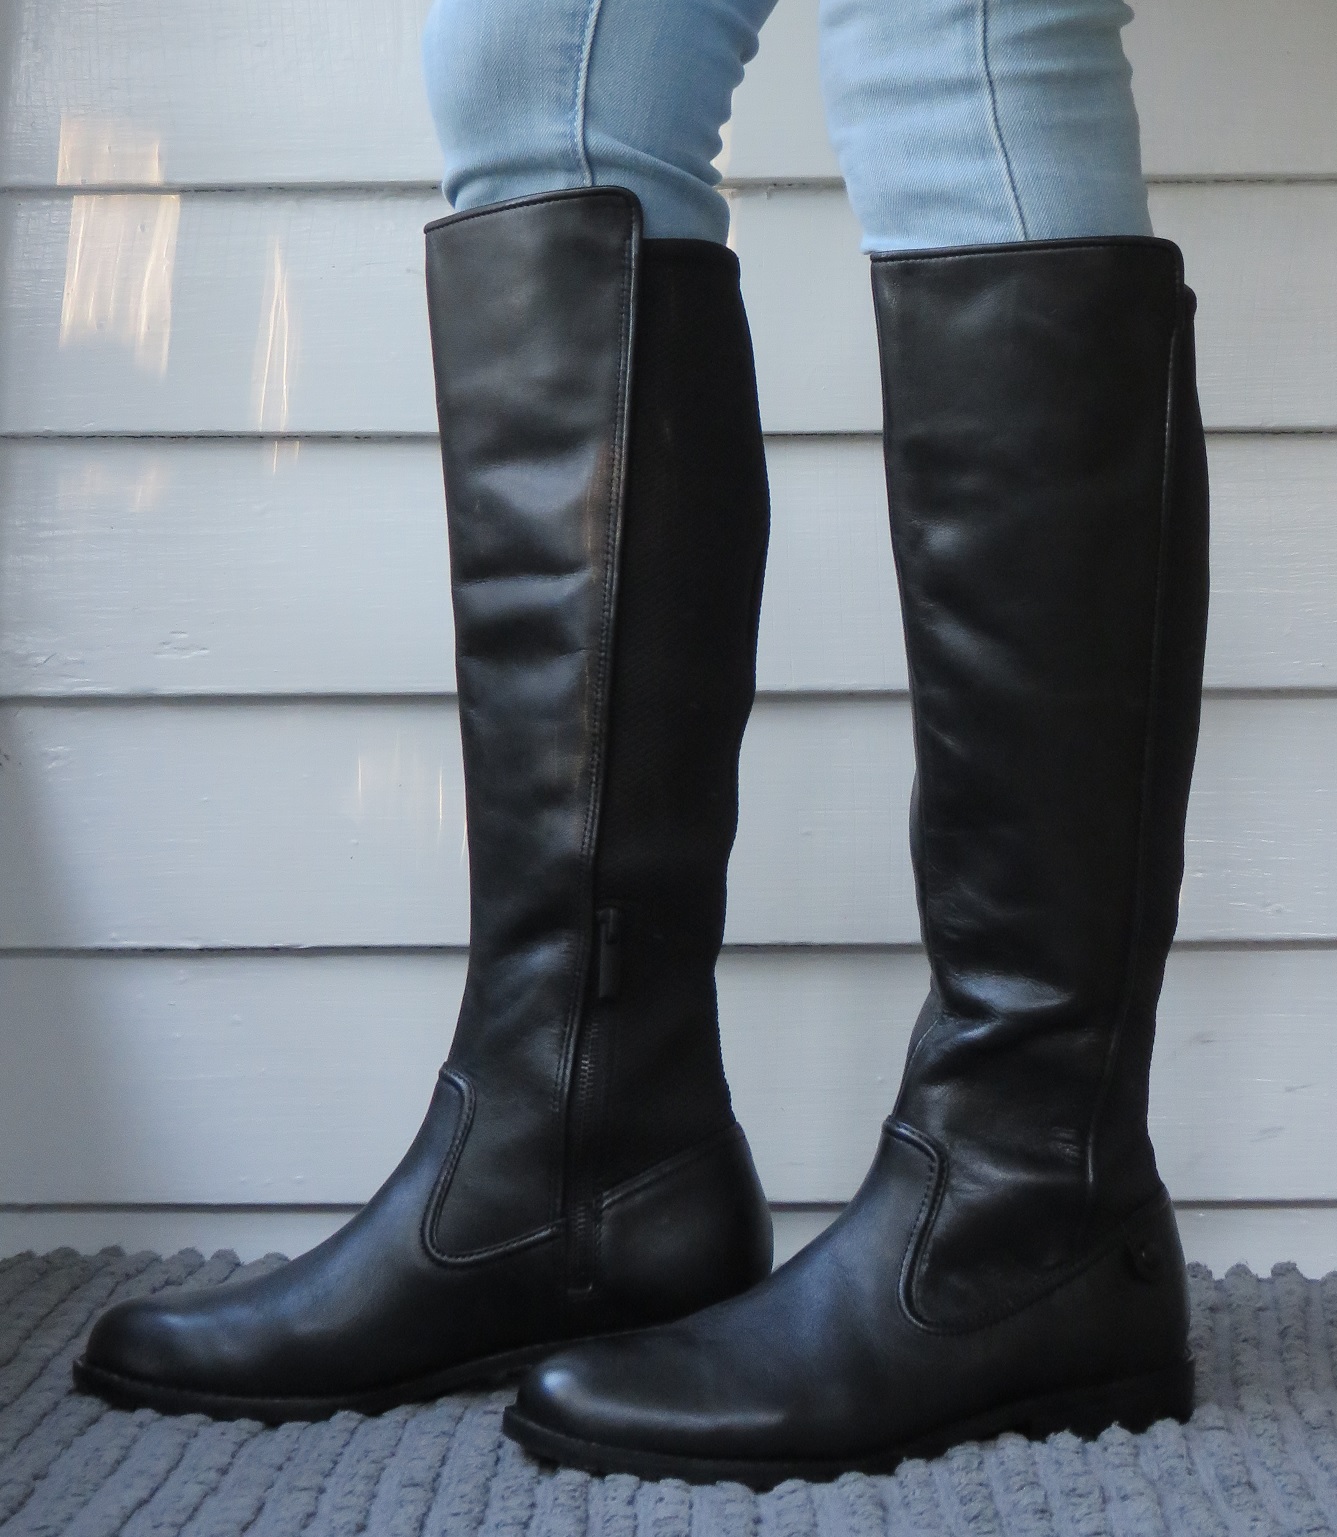 Howdy Slim! Riding Boots for Thin Calves: Lacoste Rosolinn Tall